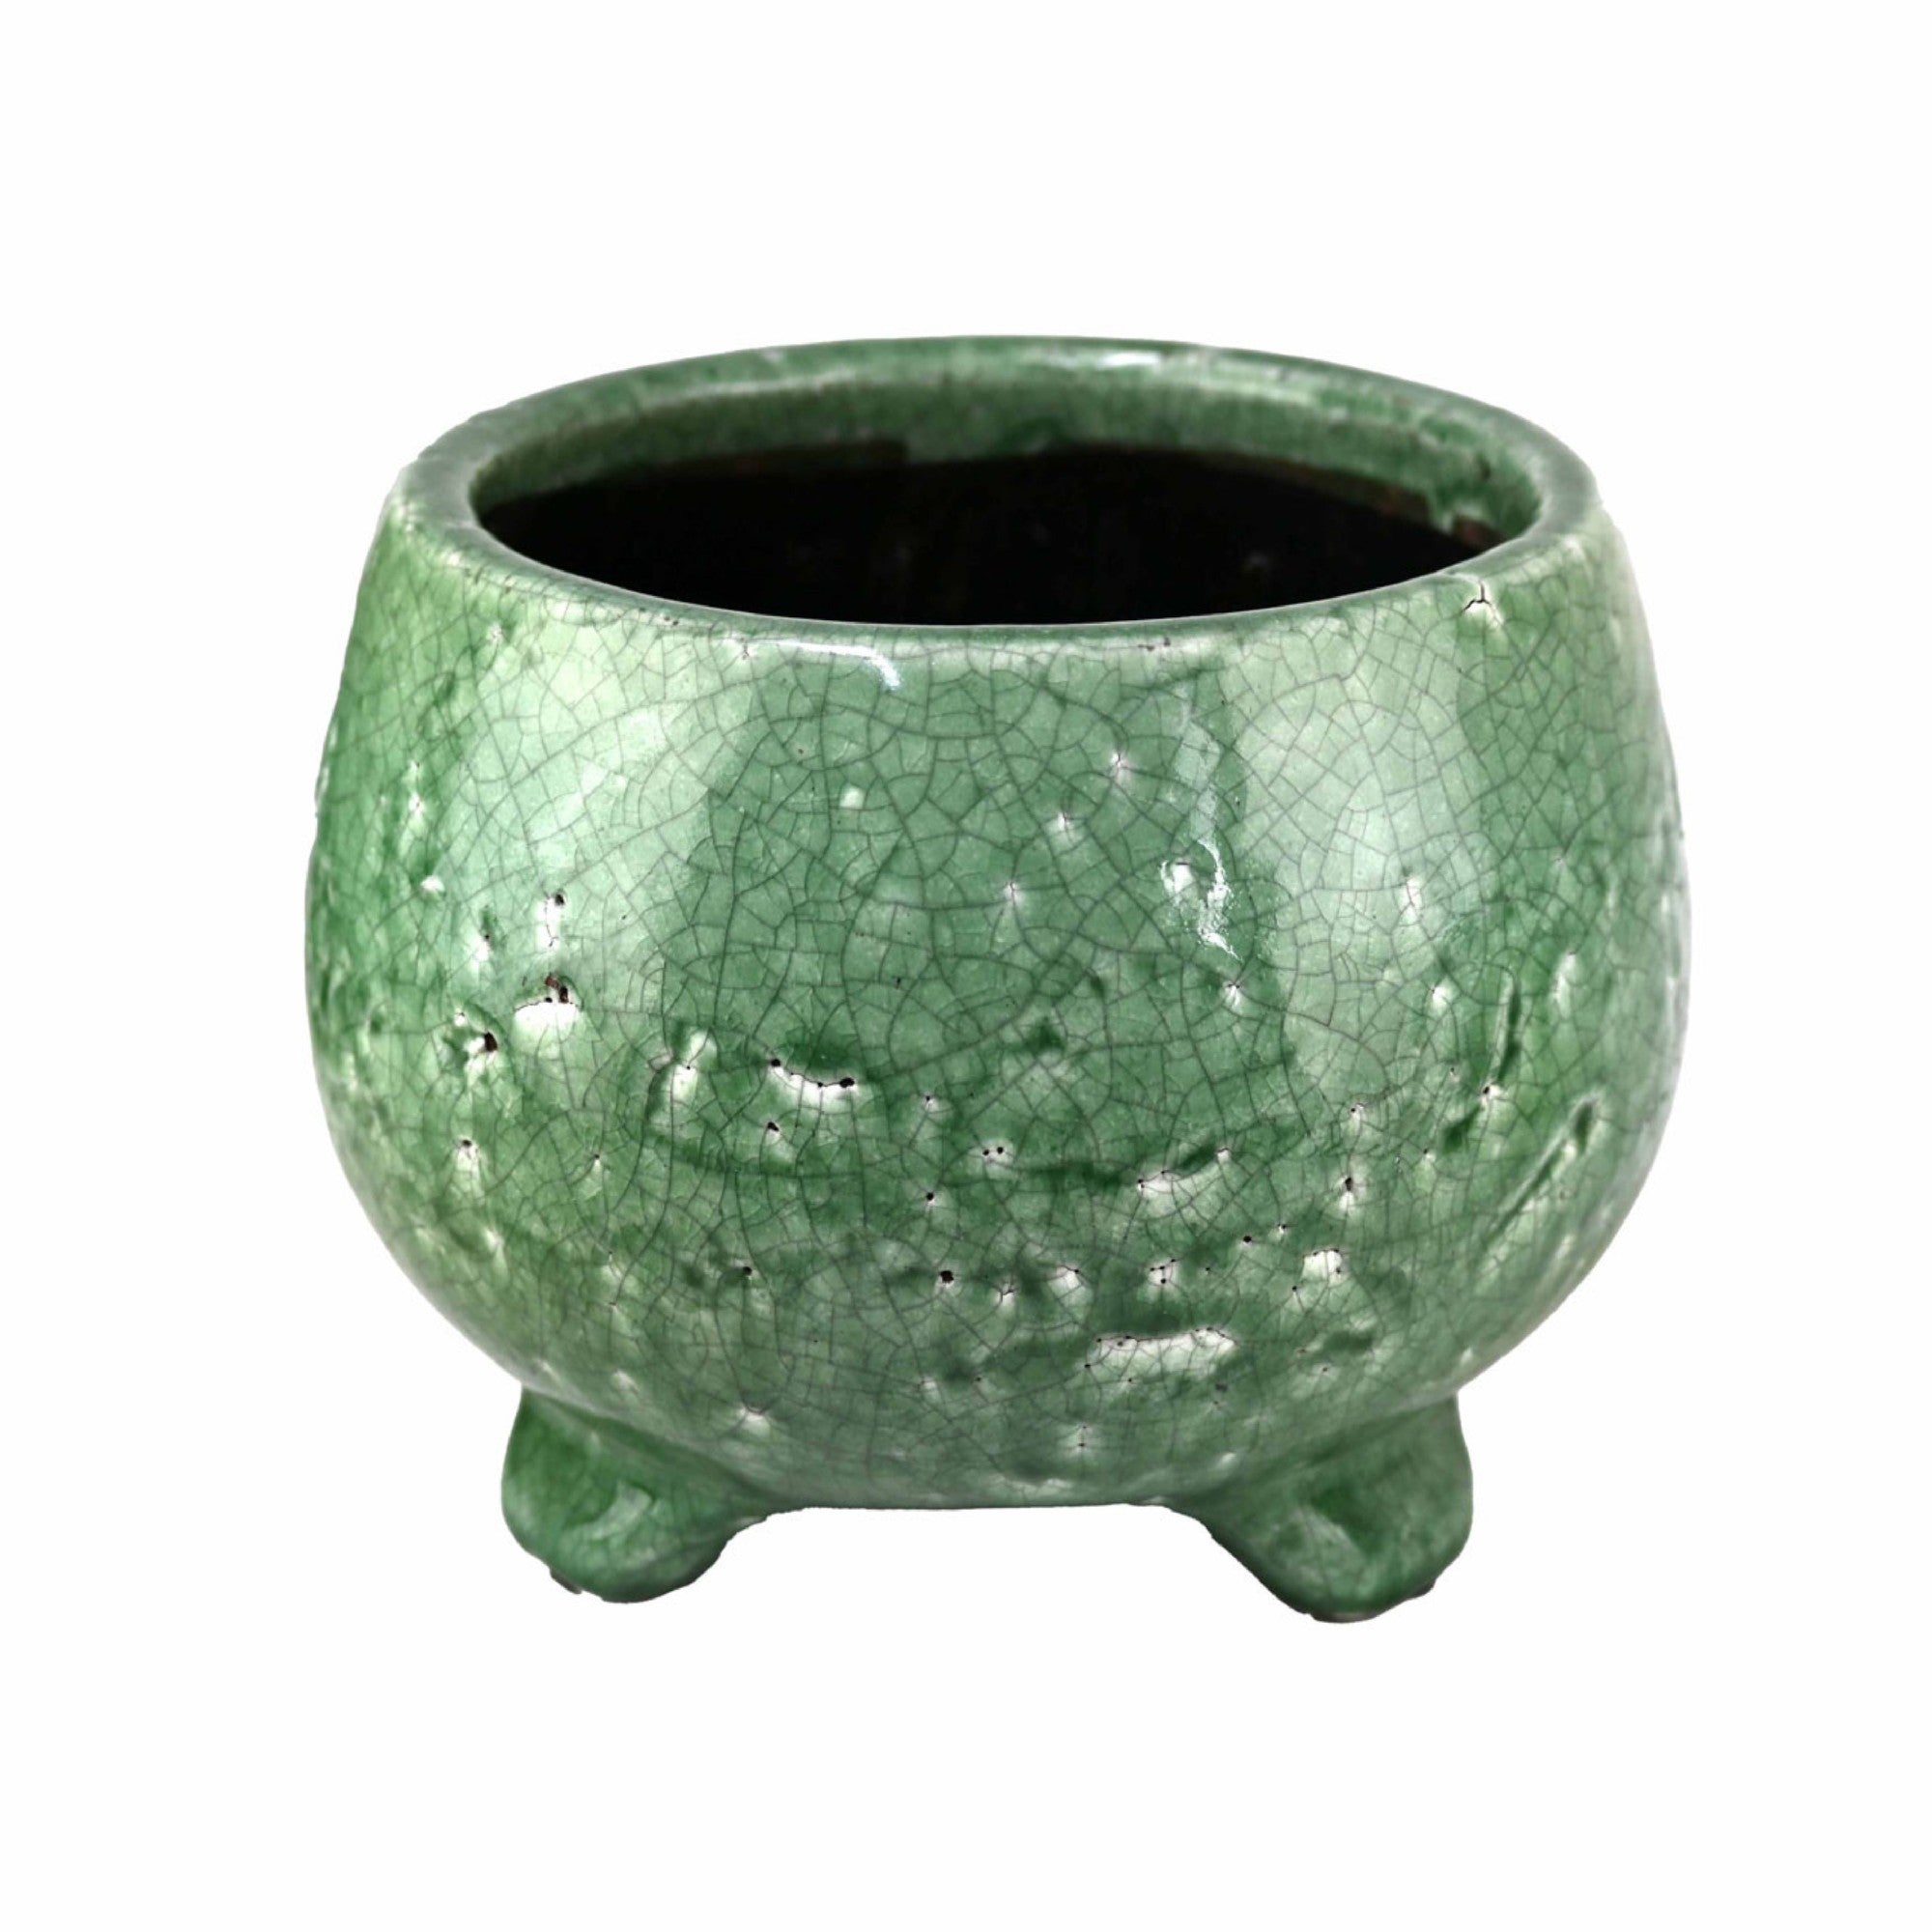 Tang Bowl With Feet Green 20x15cm